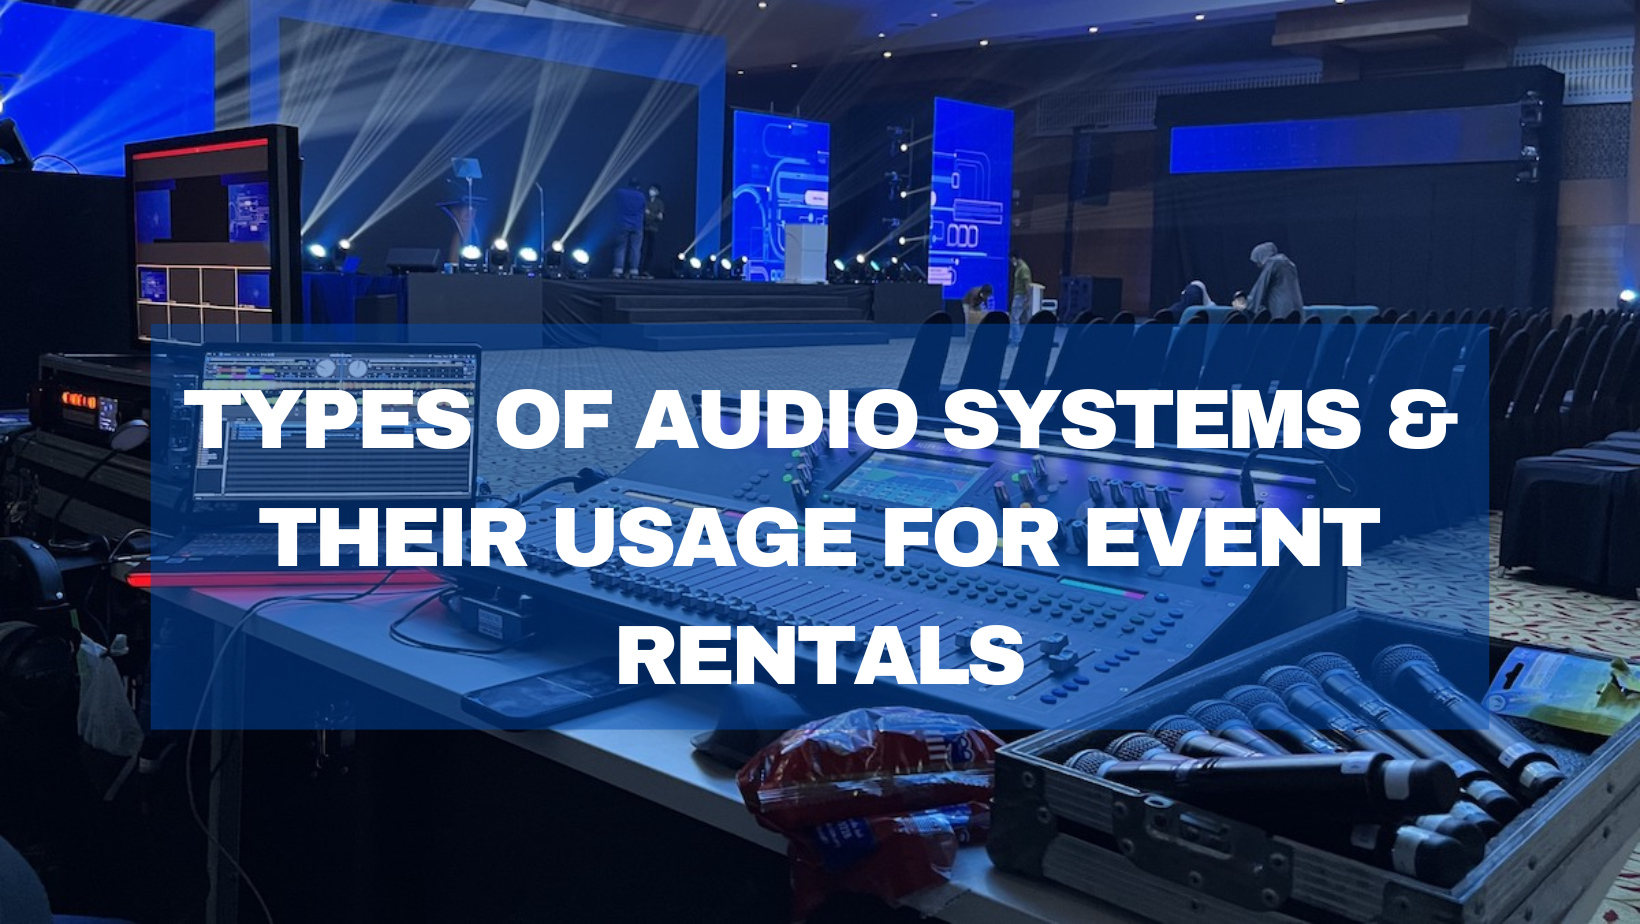 Types of Audio Systems & Their Usage for Event Rentals